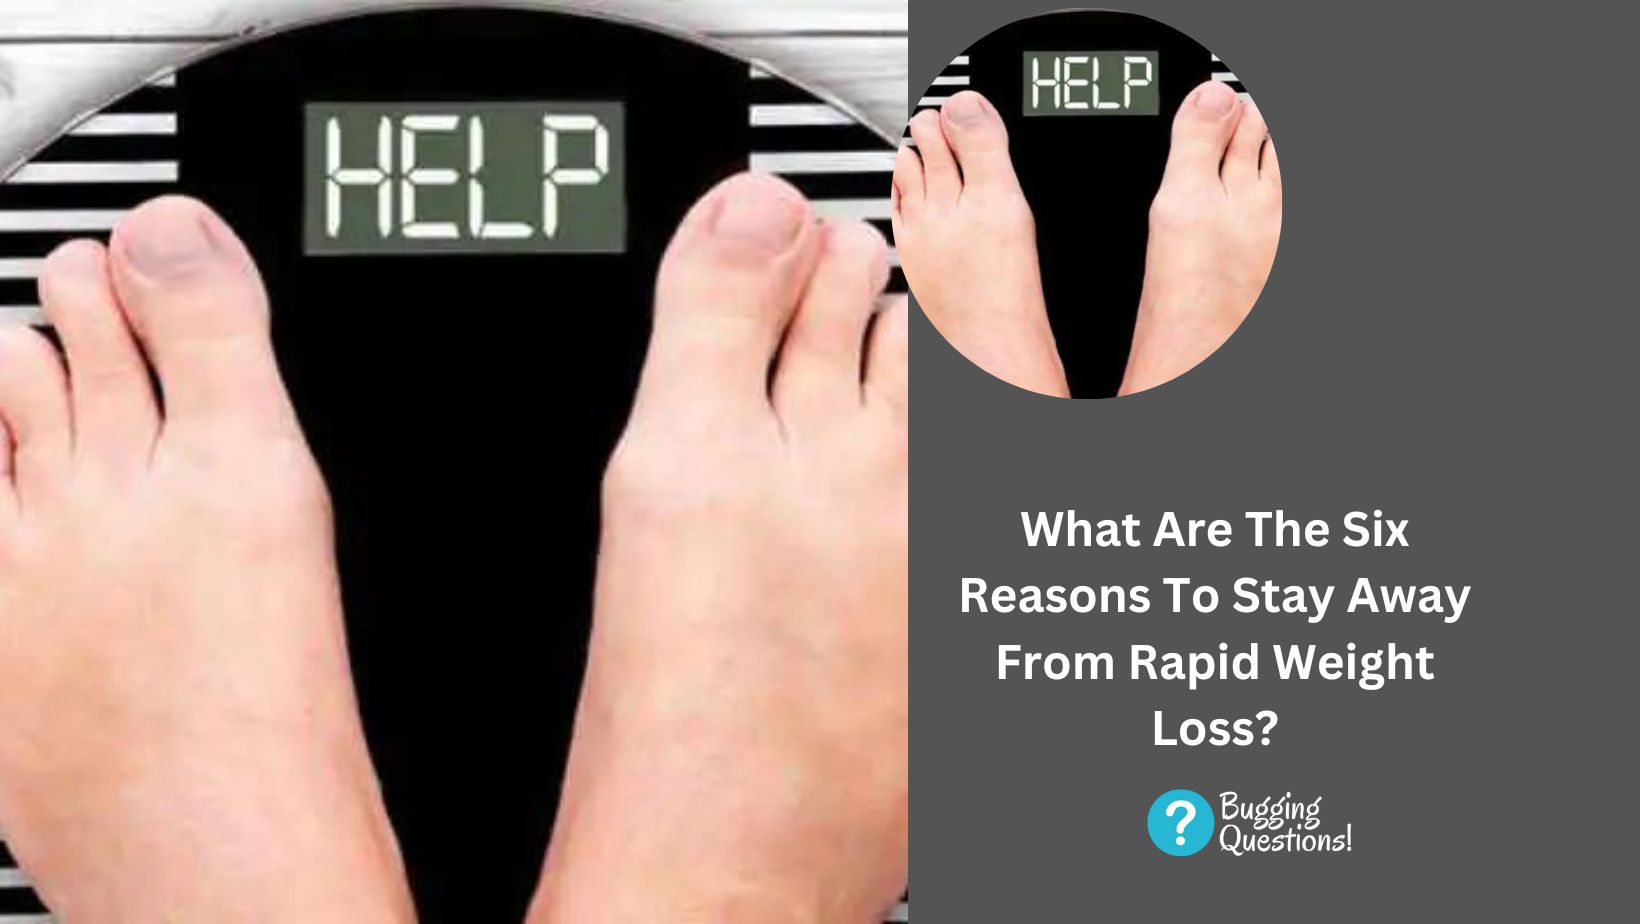 What Are The Six Reasons To Stay Away From Rapid Weight Loss?